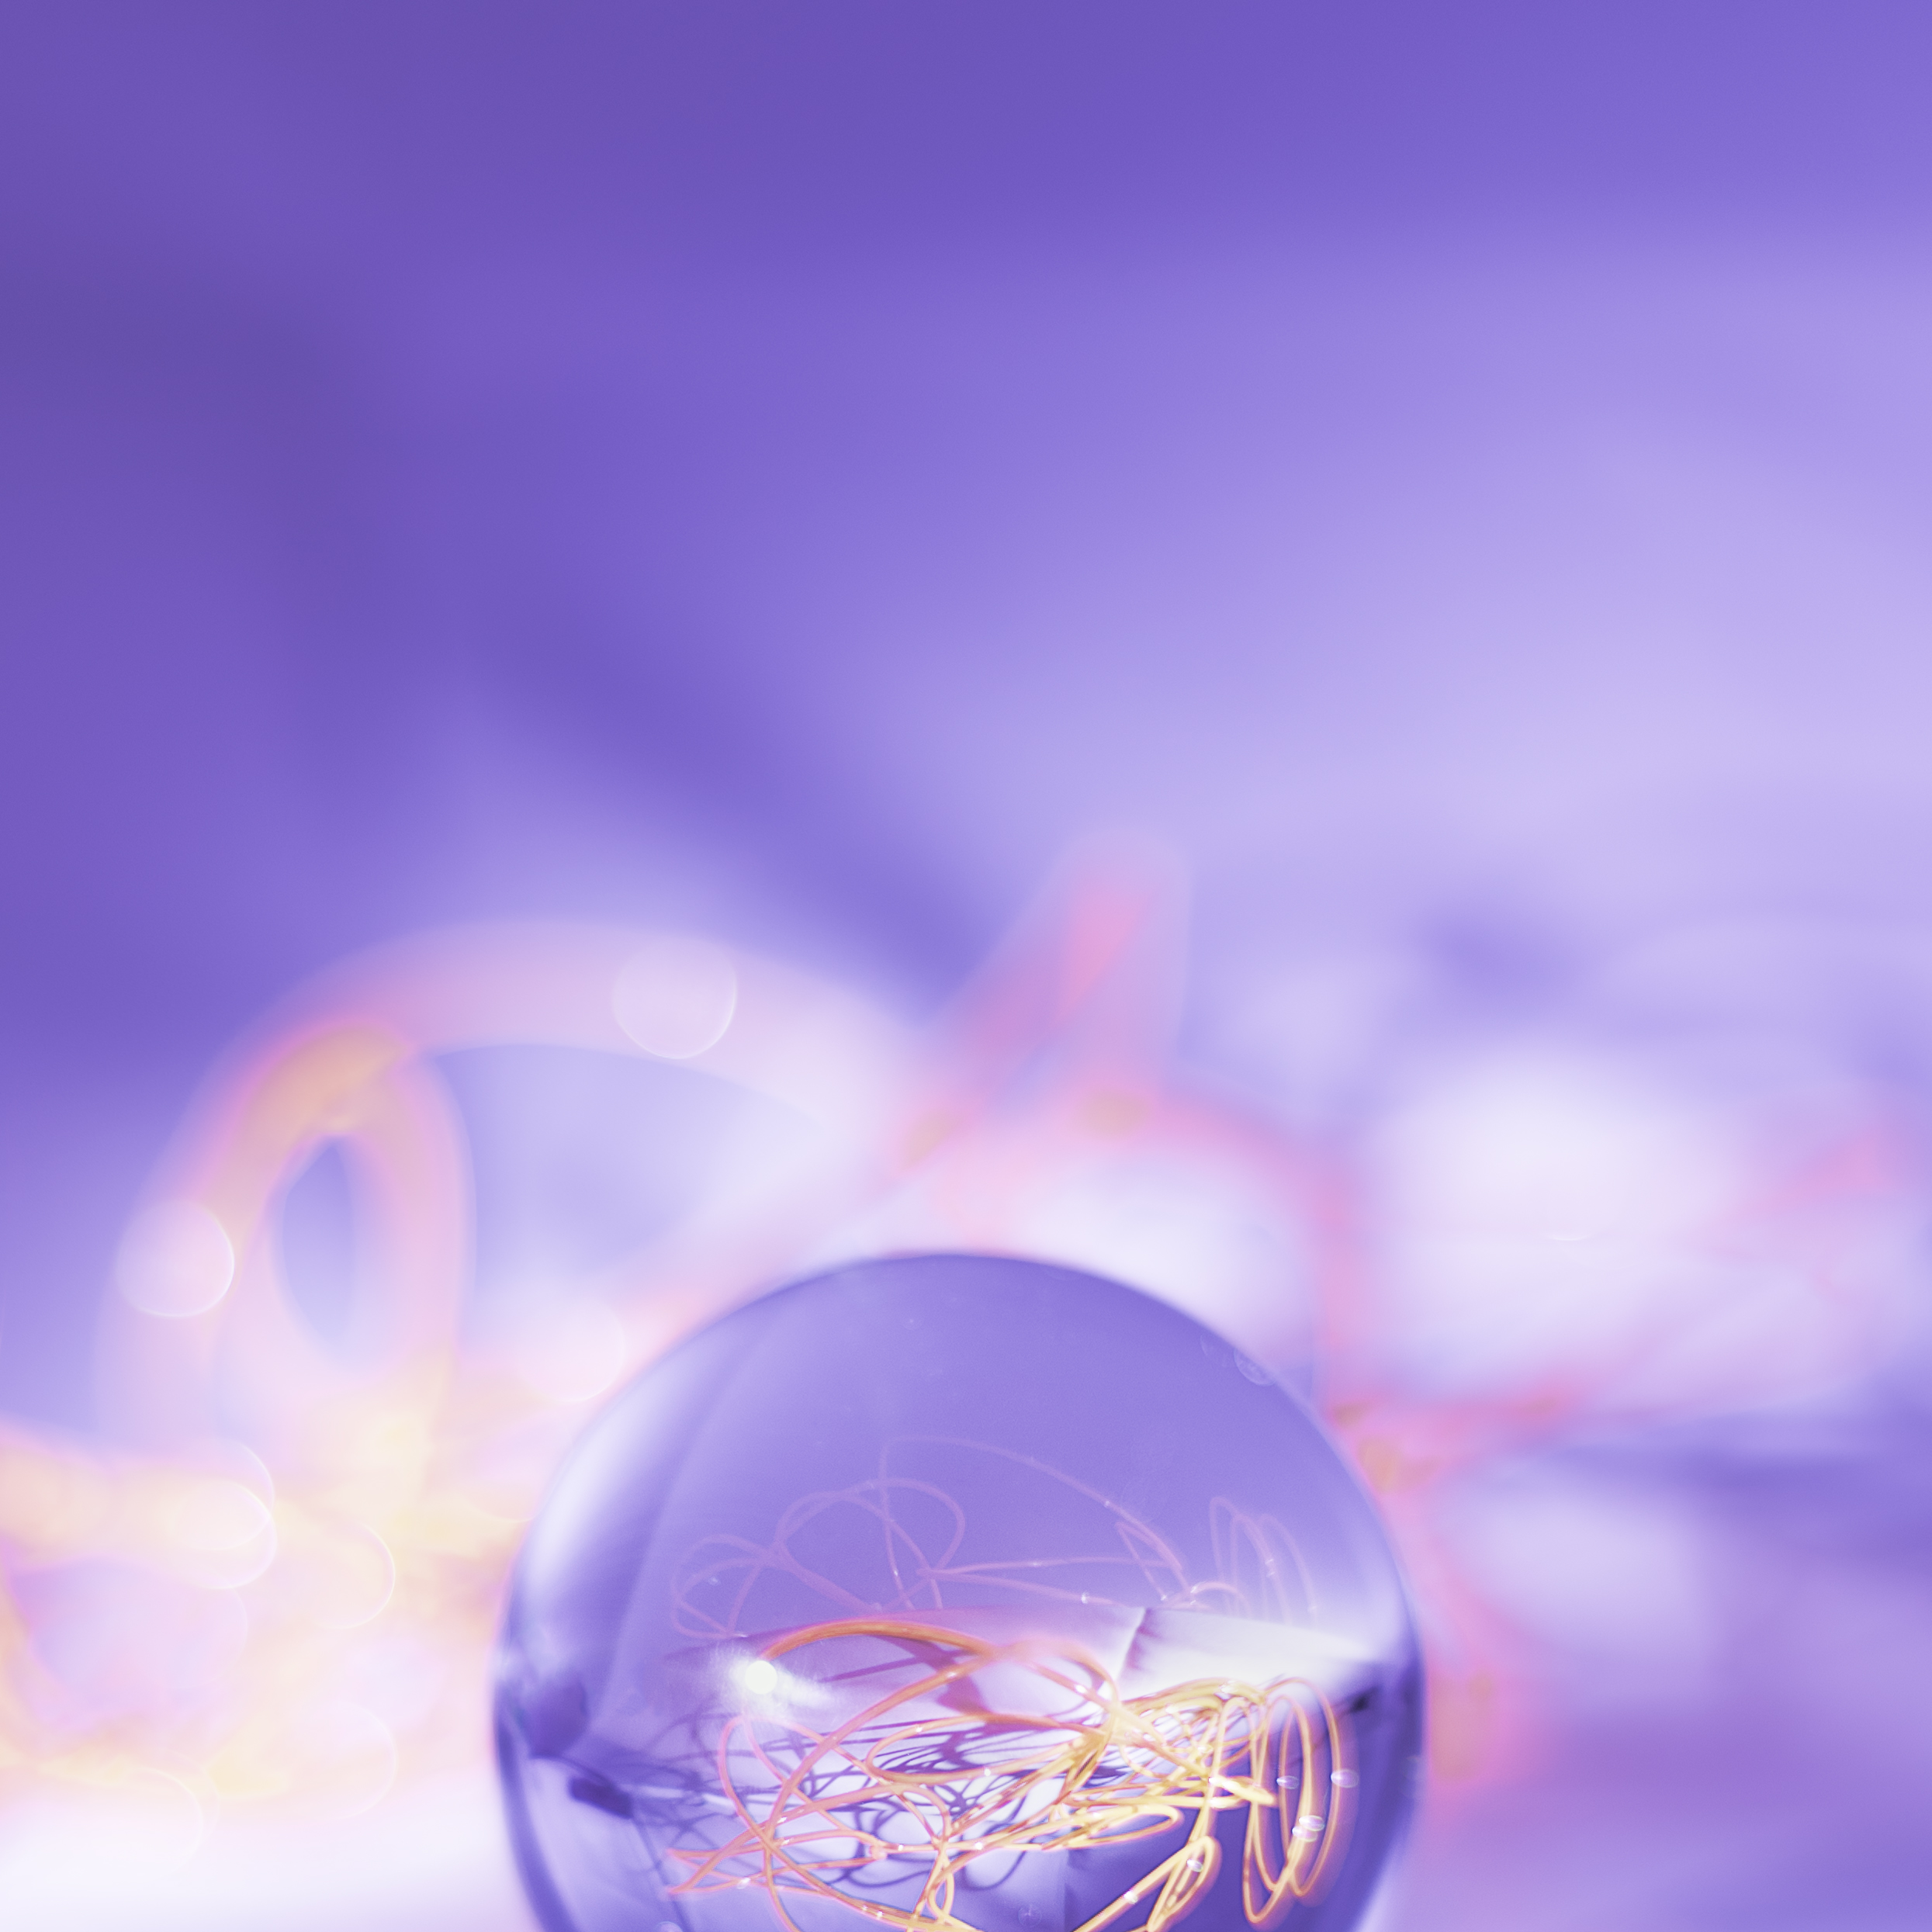 crystal, ball, purple, violet, reflection, macro phone background